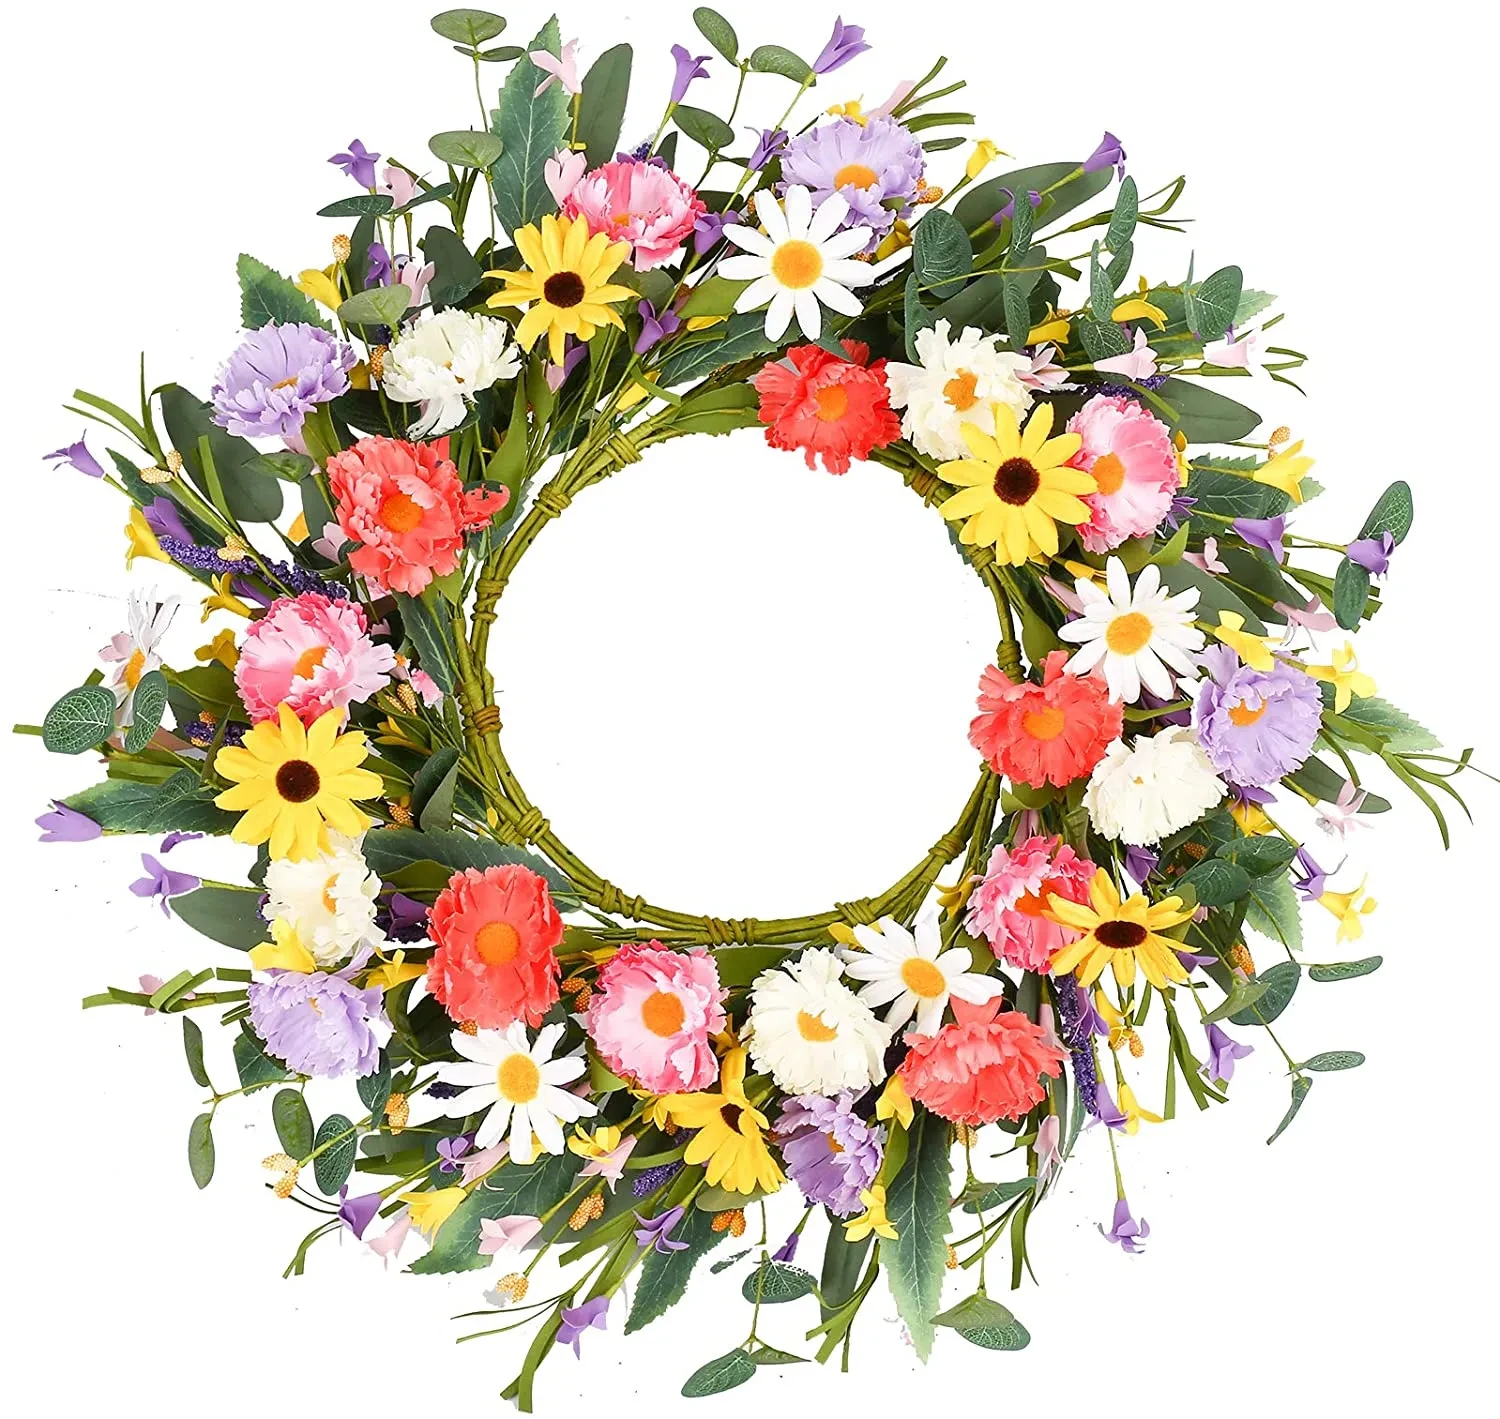 New Arrival Artificial Easter Wreath